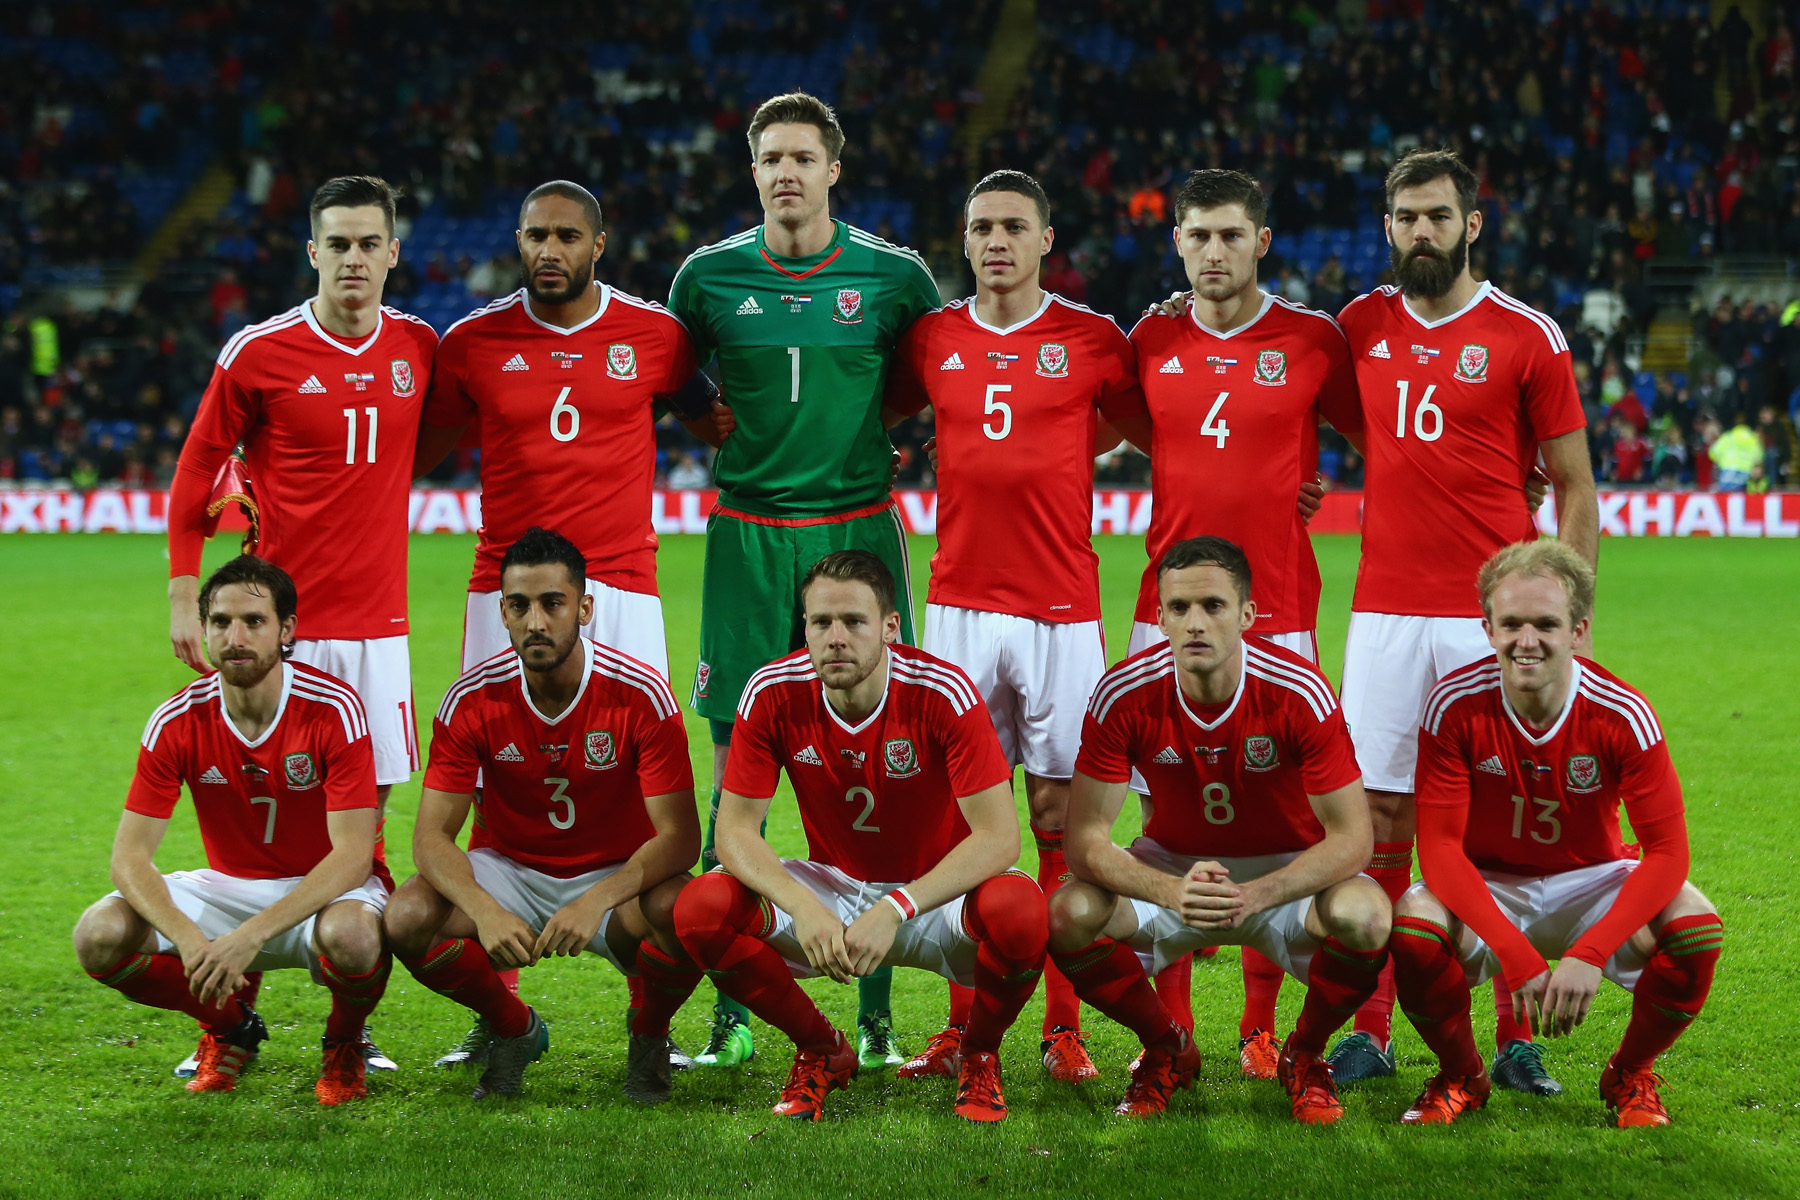 CARDIFF, WALES - NOVEMBER 13: Wales team group ahead of the international friendly match between Wales and Netherlands at Cardiff City Stadium on November 13, 2015 in Cardiff, Wales. (Photo by Michael Steele/Getty Images)